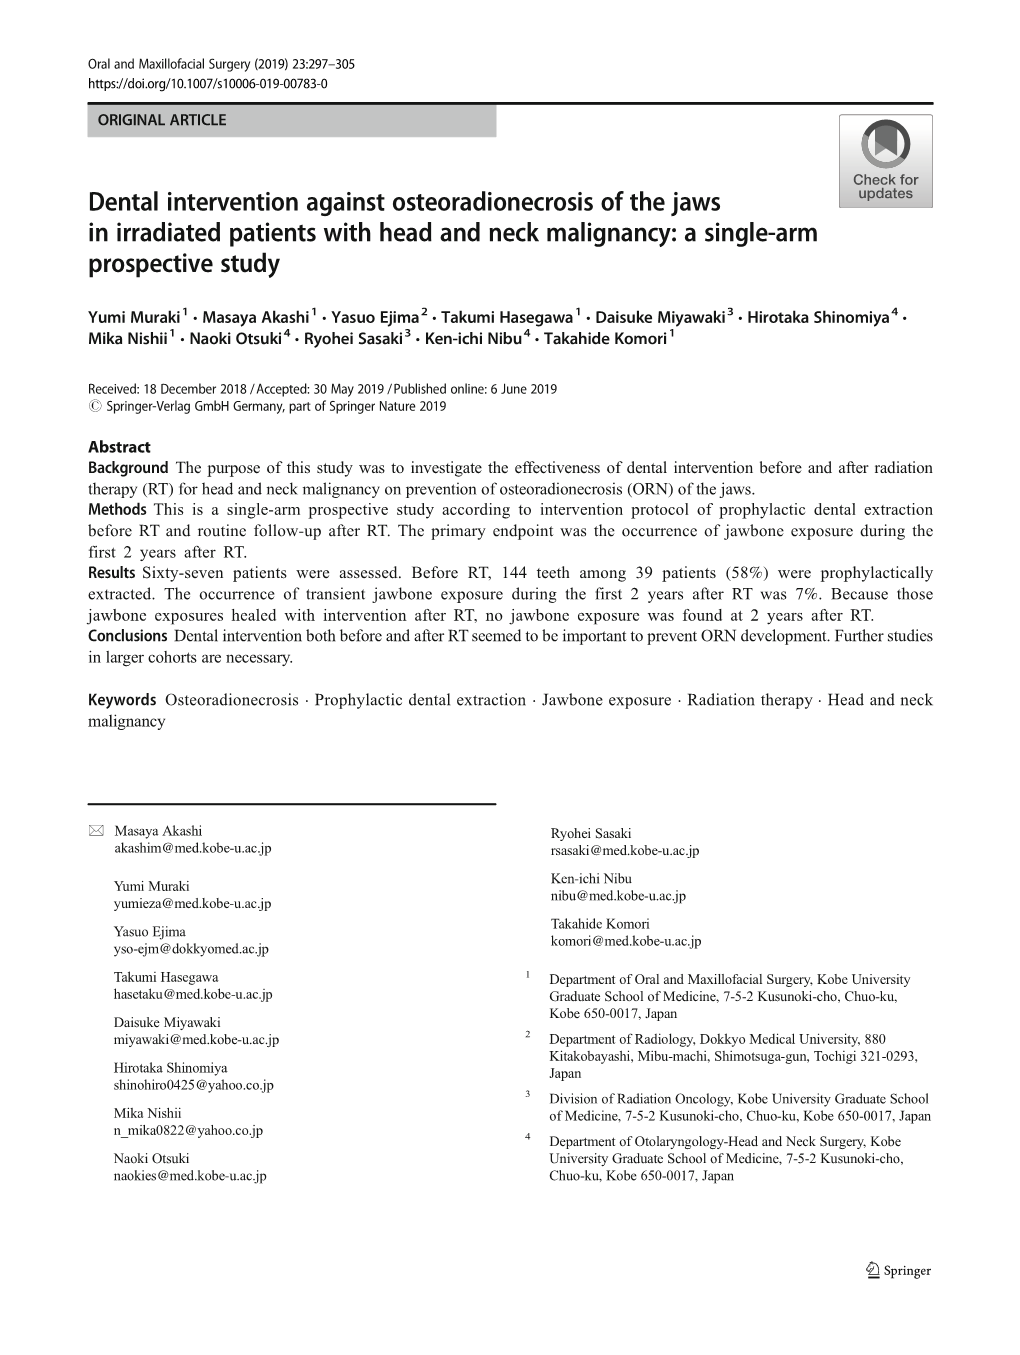 Dental Intervention Against Osteoradionecrosis of the Jaws in Irradiated Patients with Head and Neck Malignancy: a Single-Arm Prospective Study